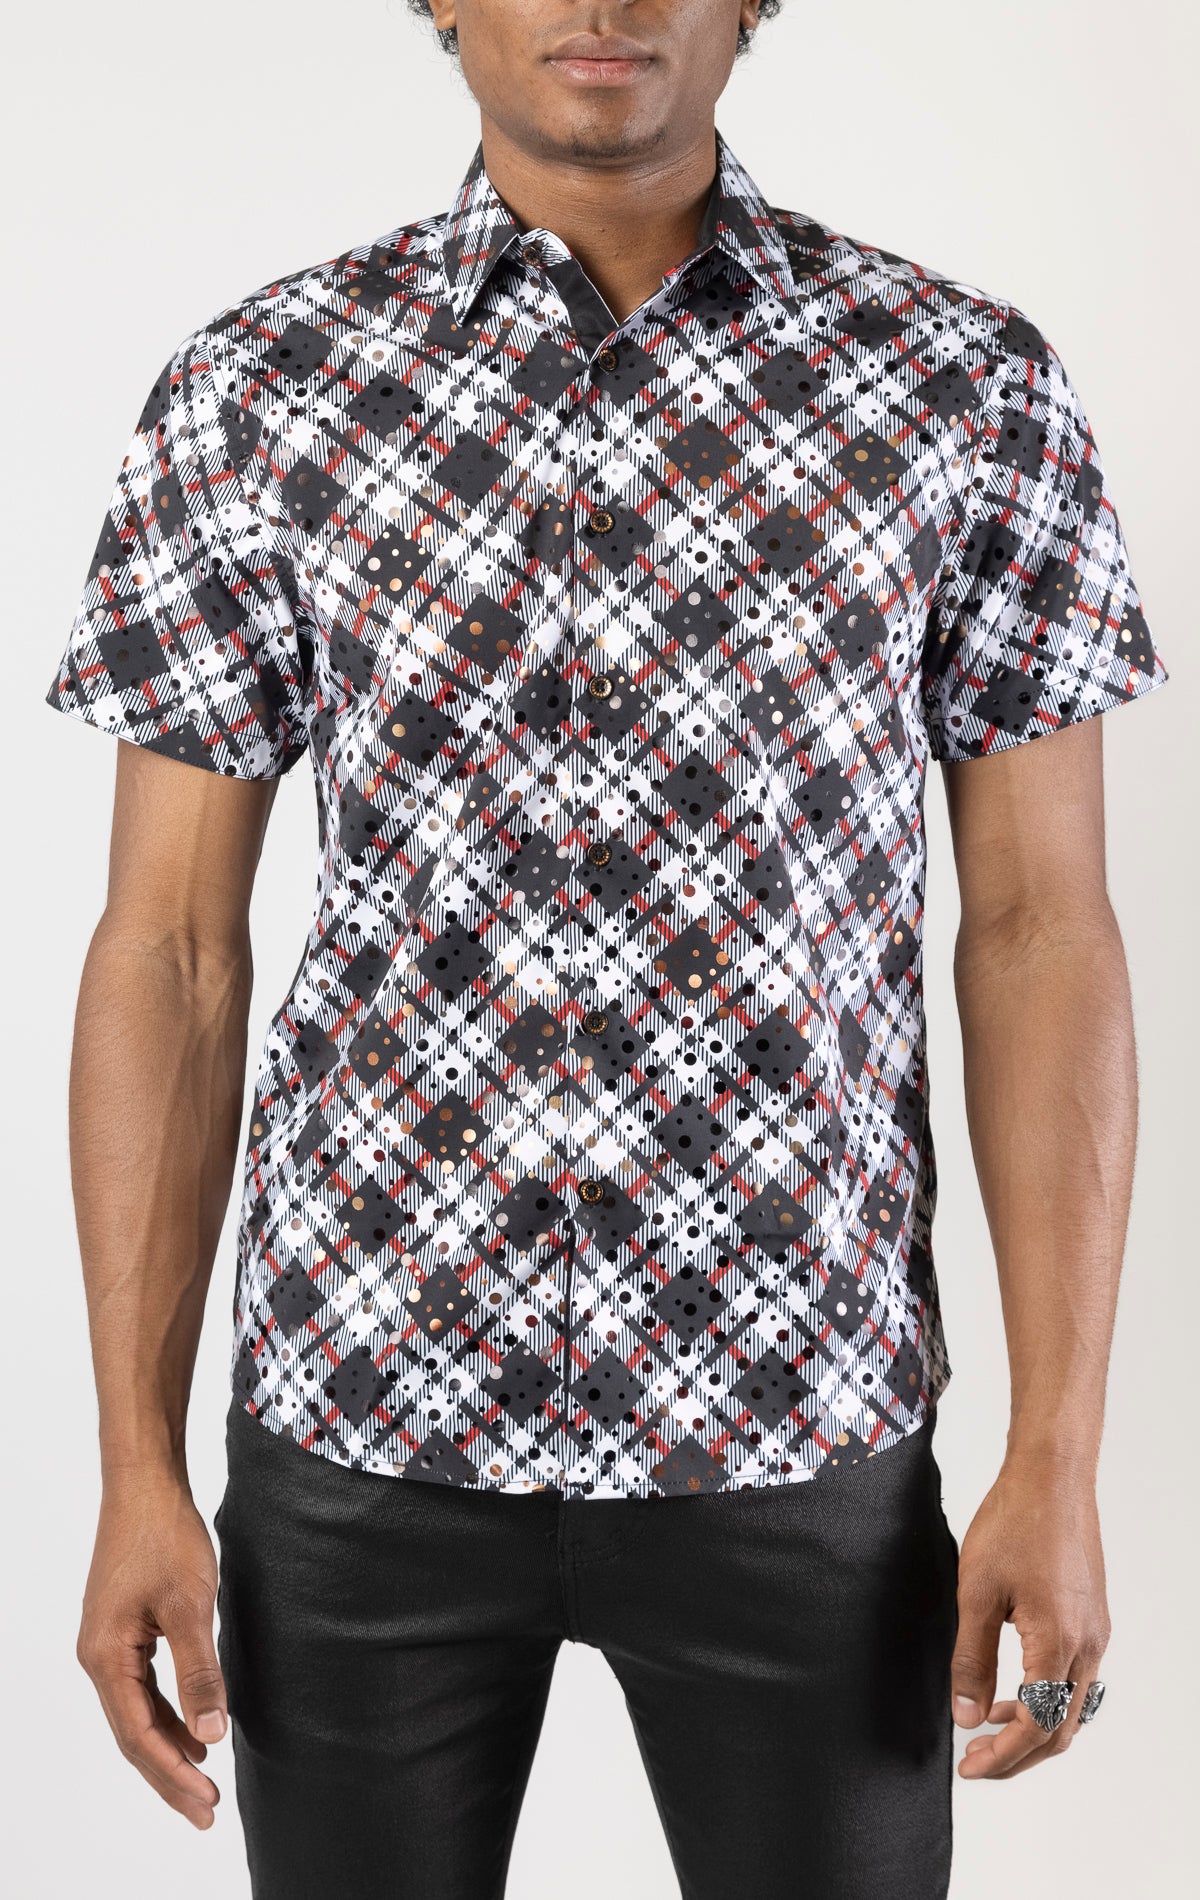 Men's casual button-down shirt in a relaxed fit with short sleeves. The shirt features a stylish pattern and a front button closure.